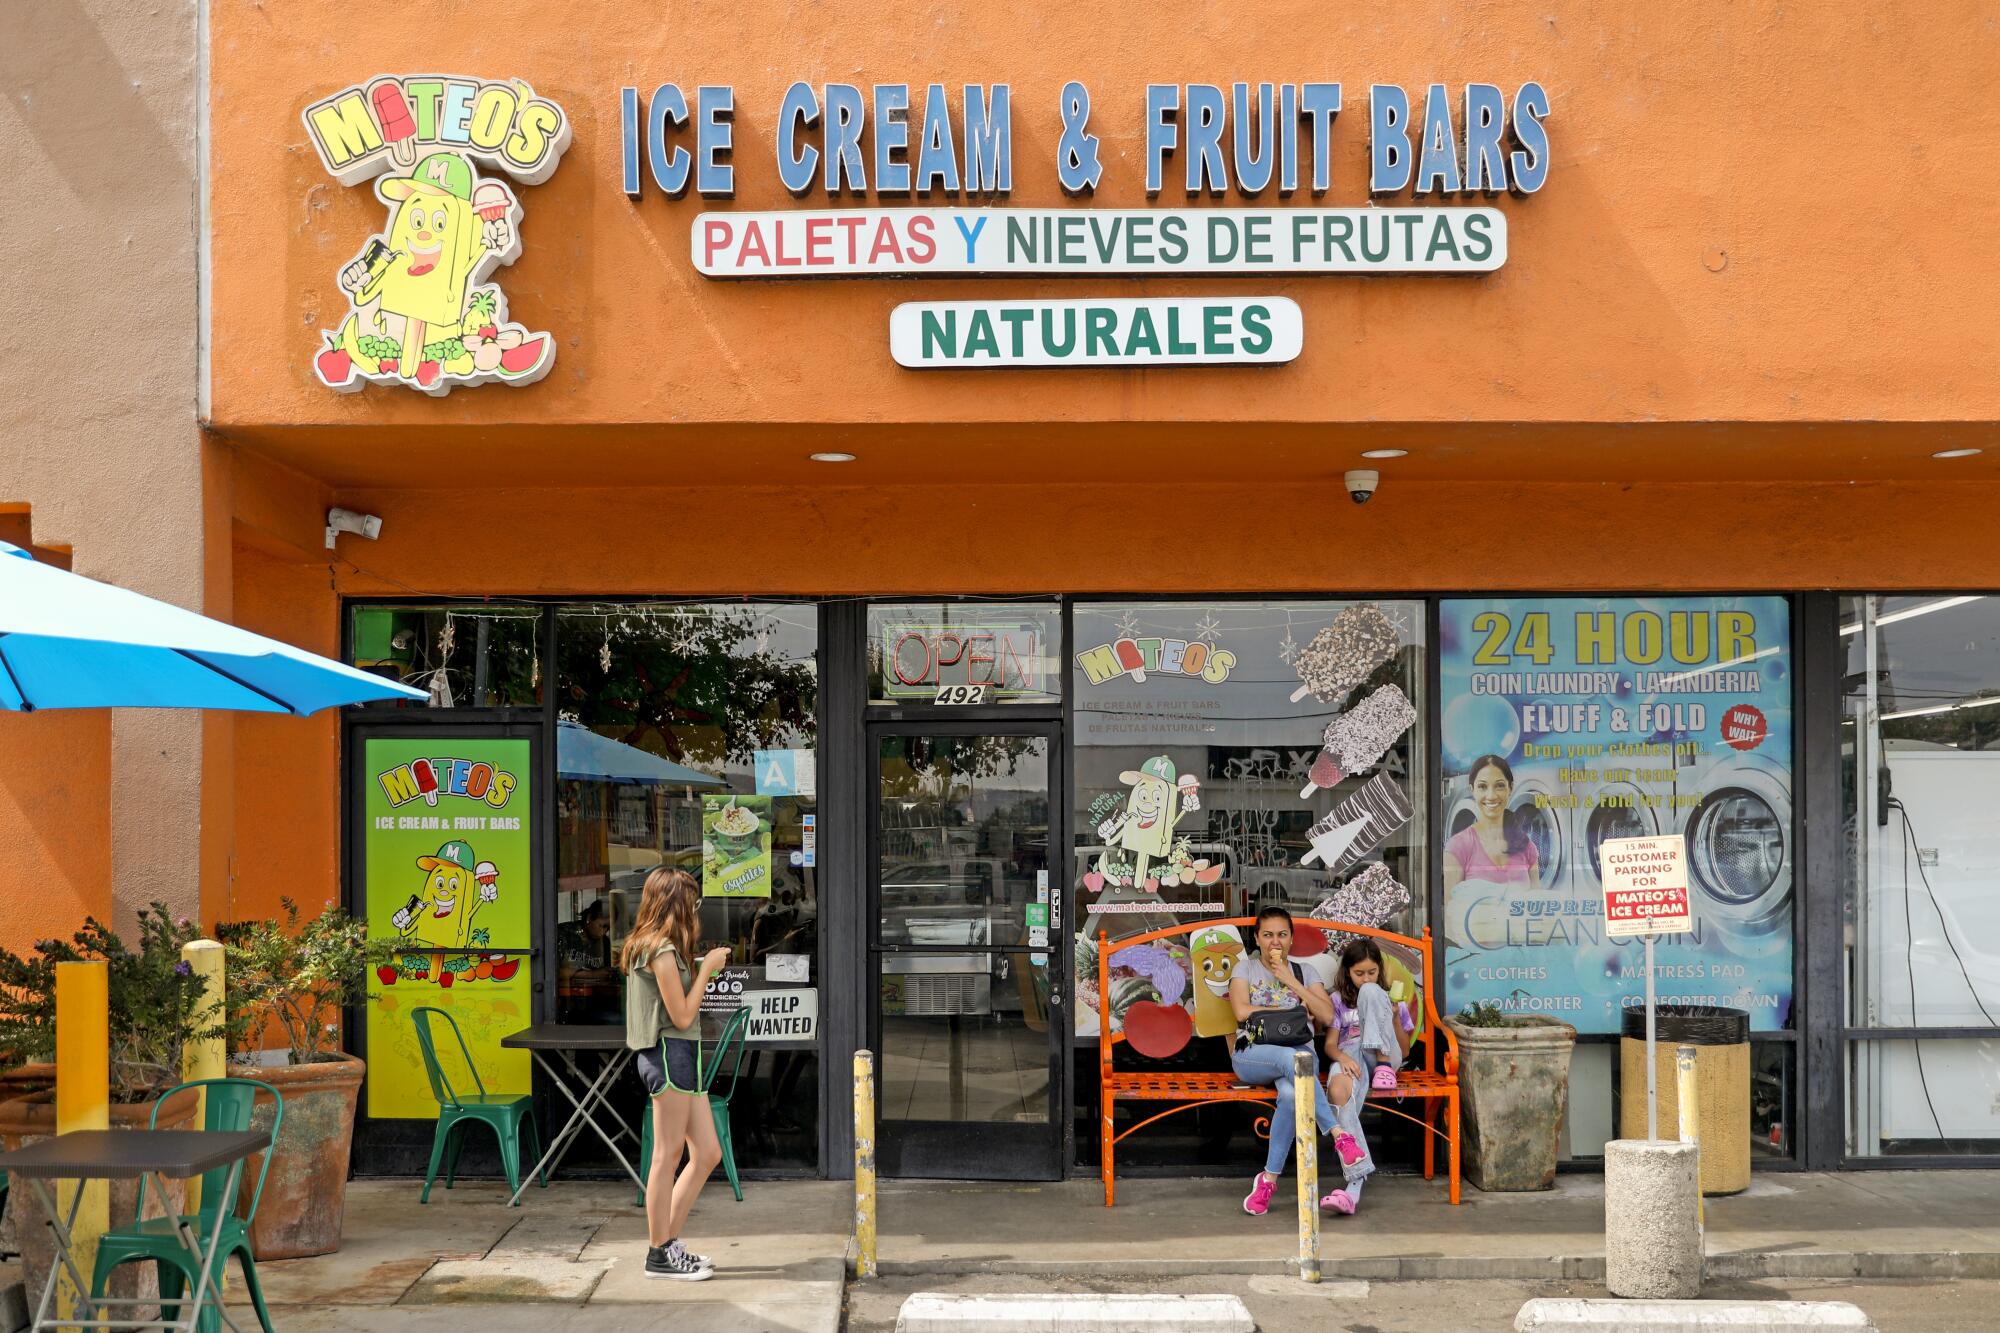 A mother and daughter enjoy paletas outside a shop